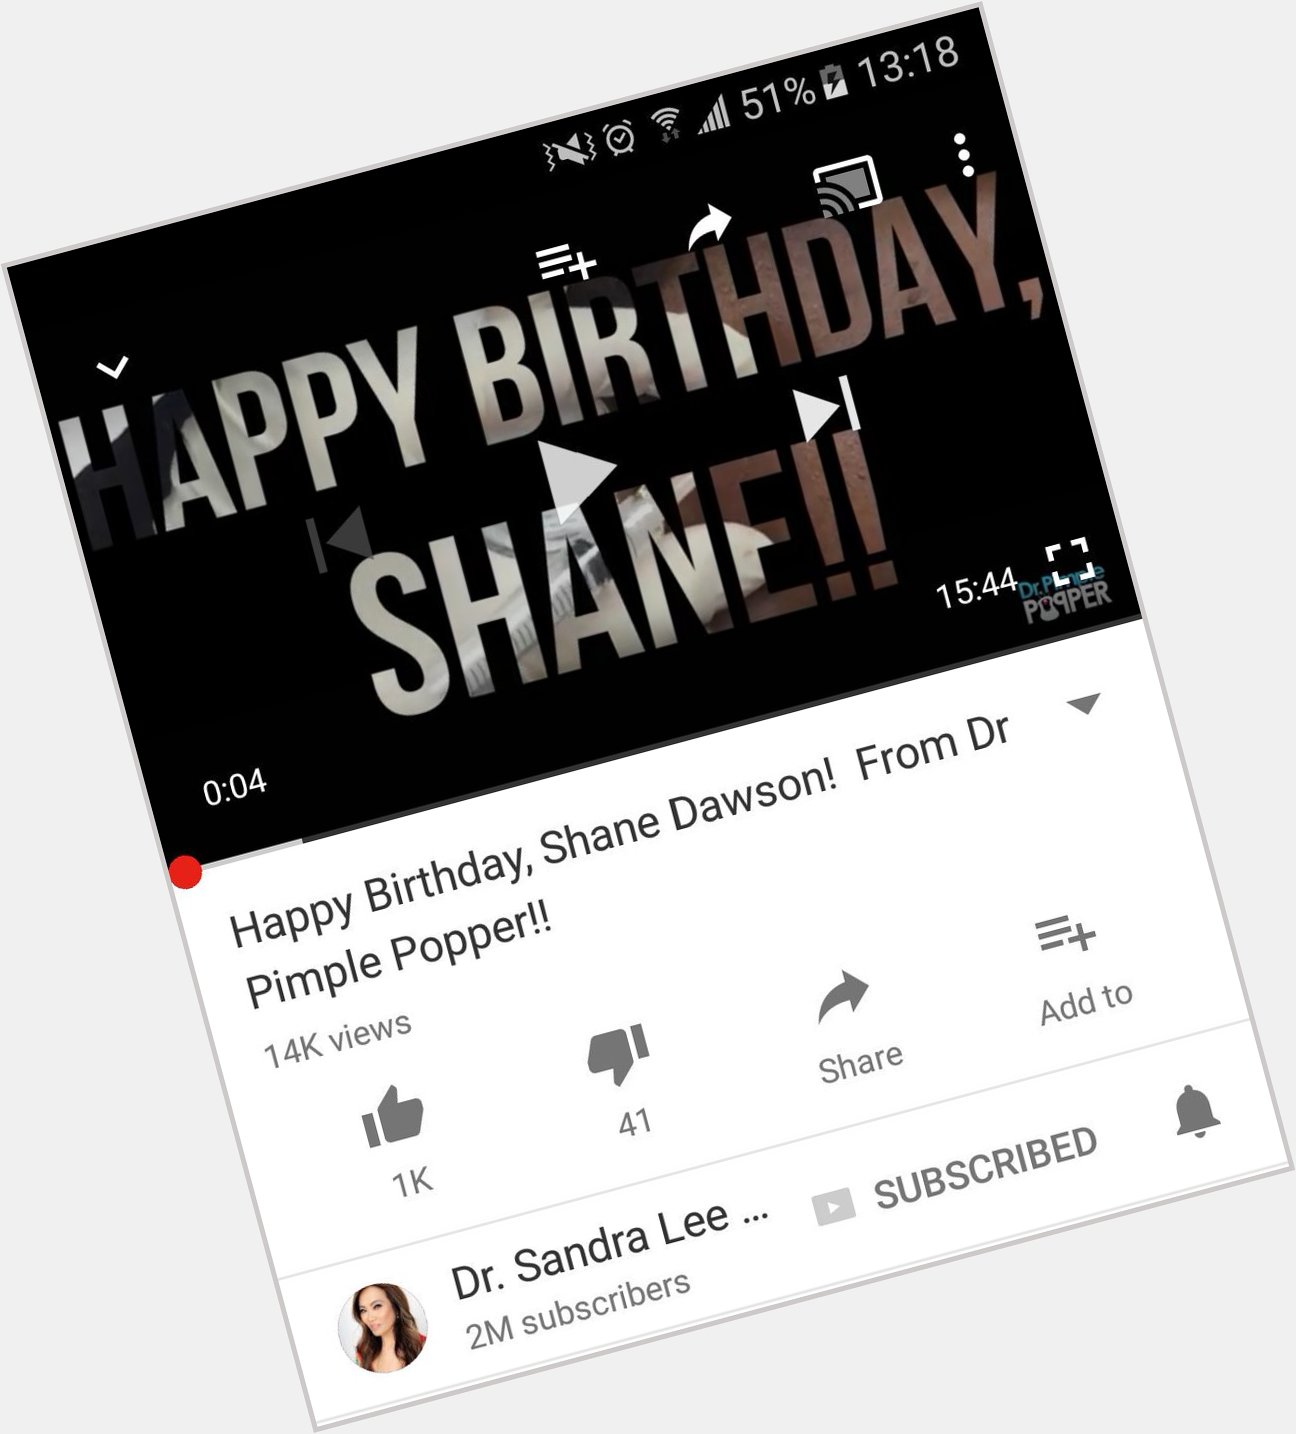  did you see the new video that Dr. Sandra Lee dedicated to you?! Happy birthday!!! 